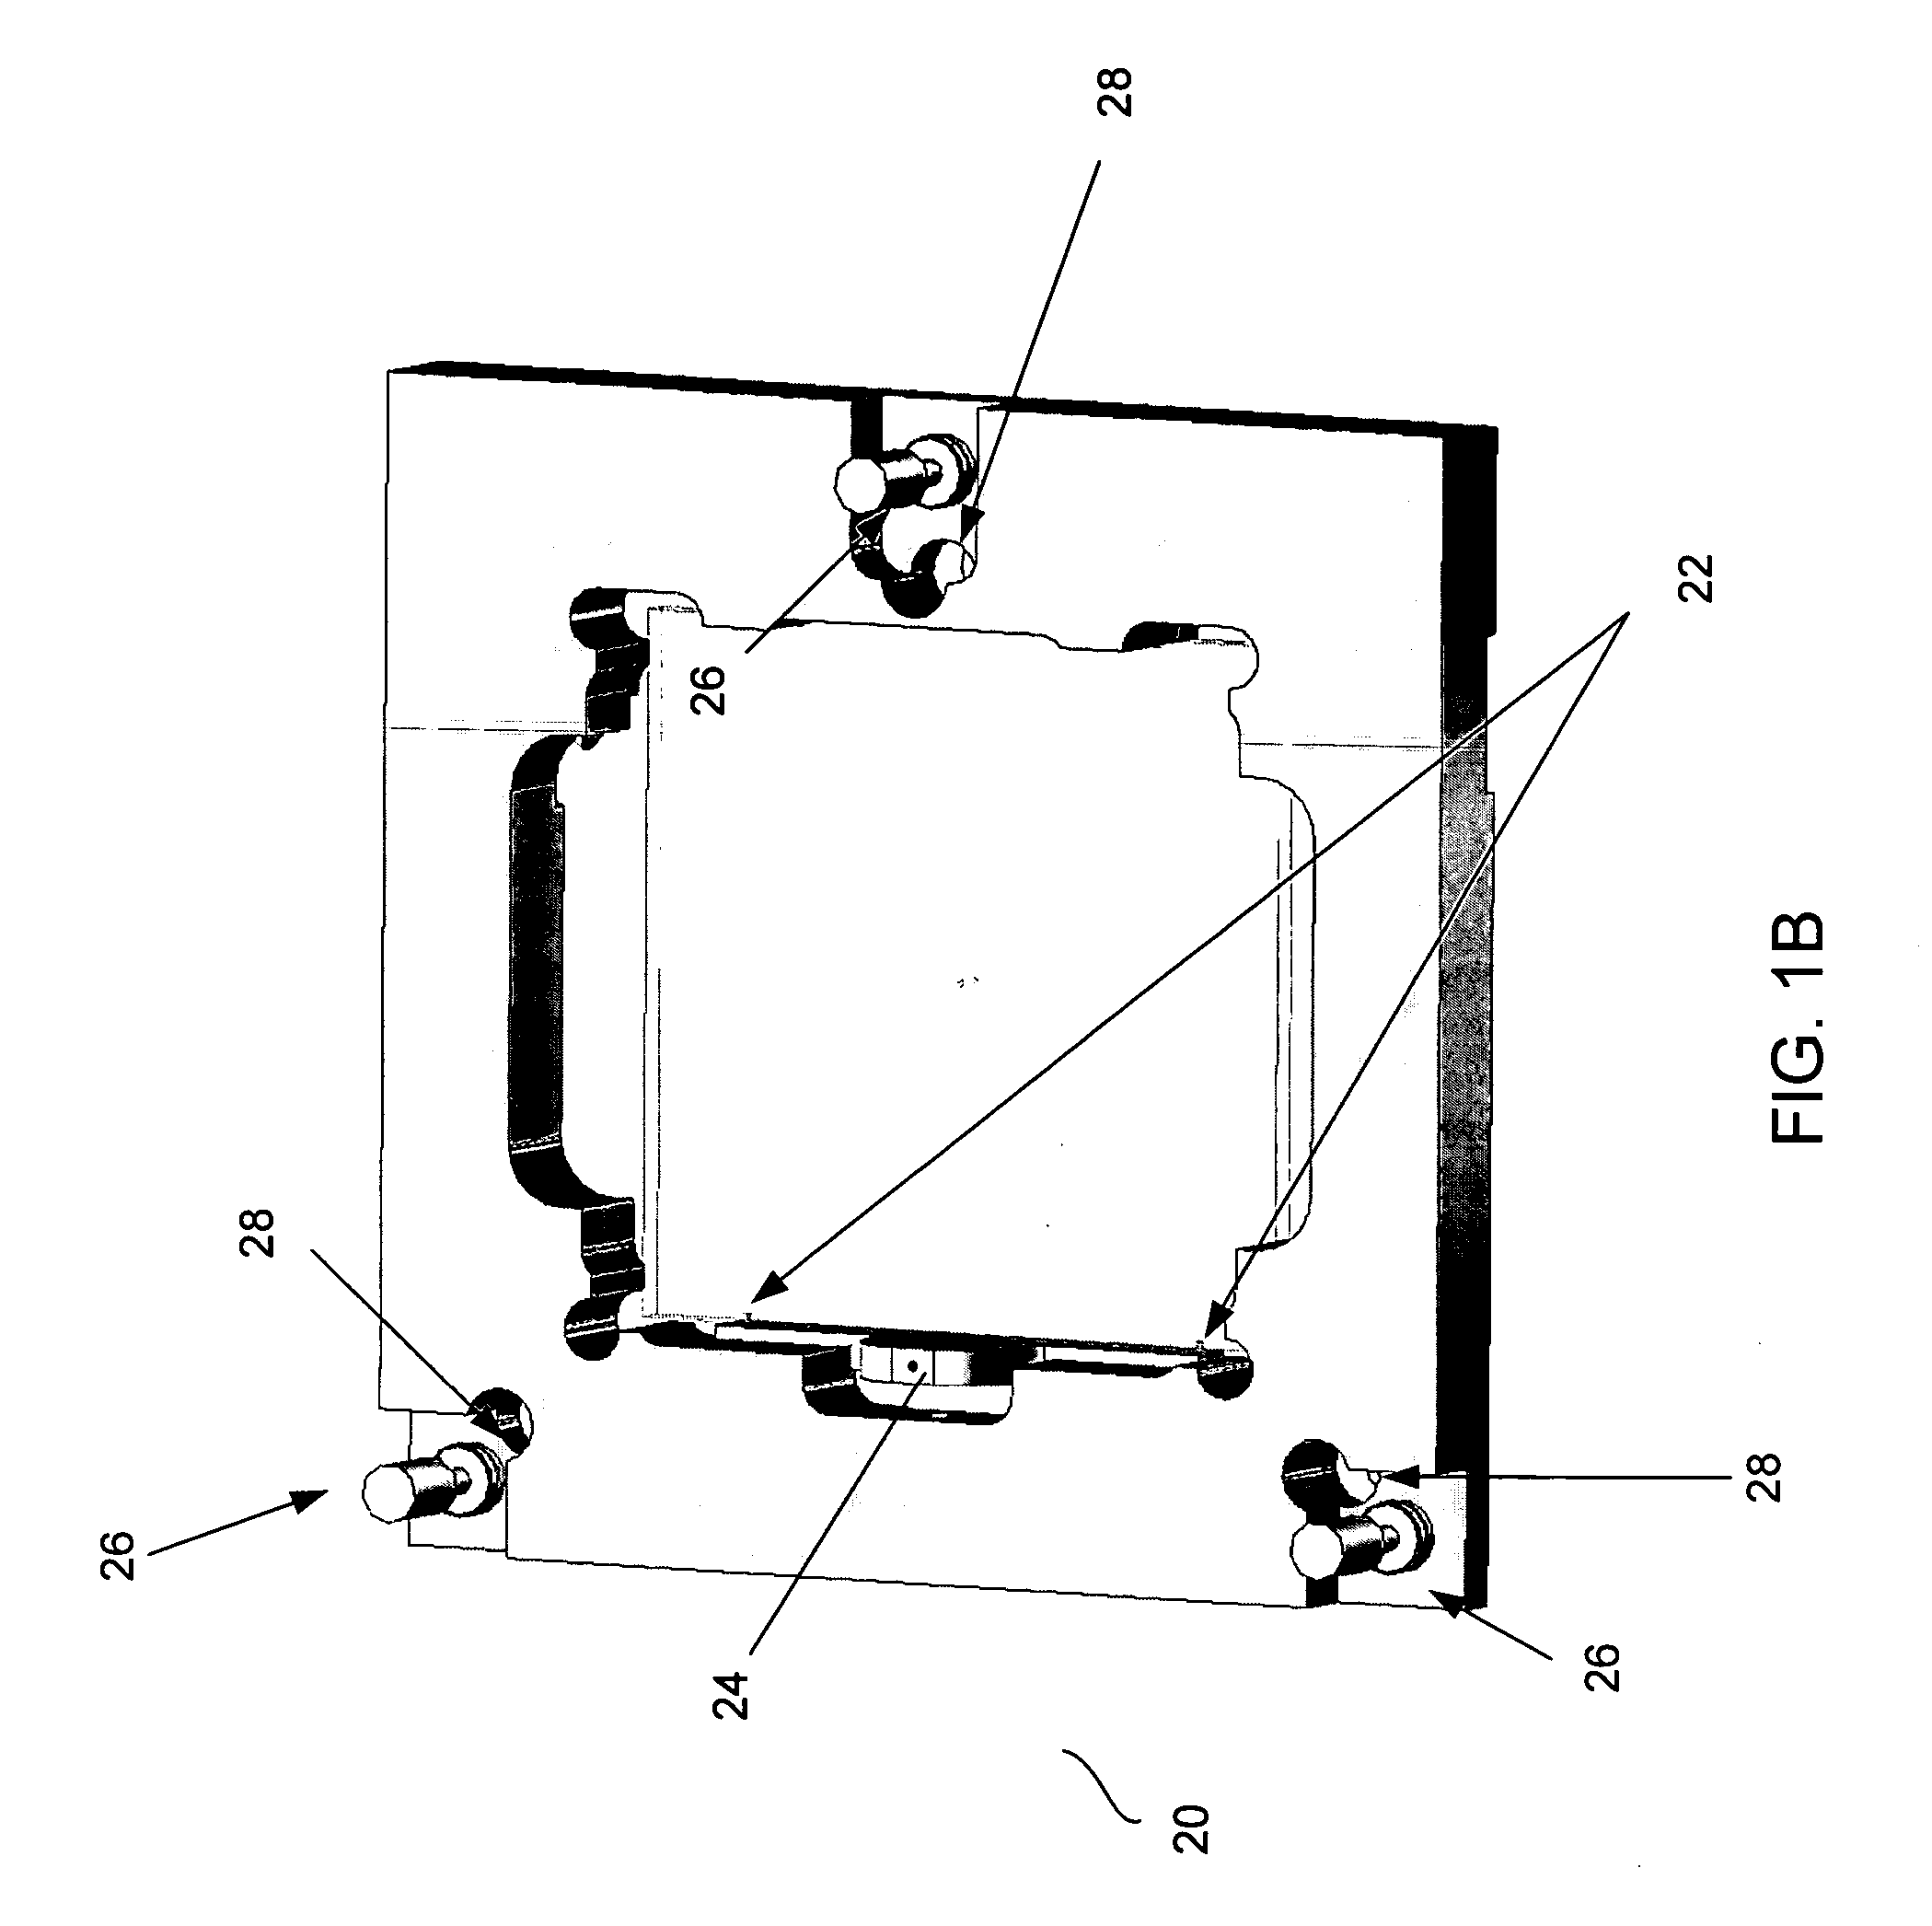 Zero-force pellicle mount and method for manufacturing the same